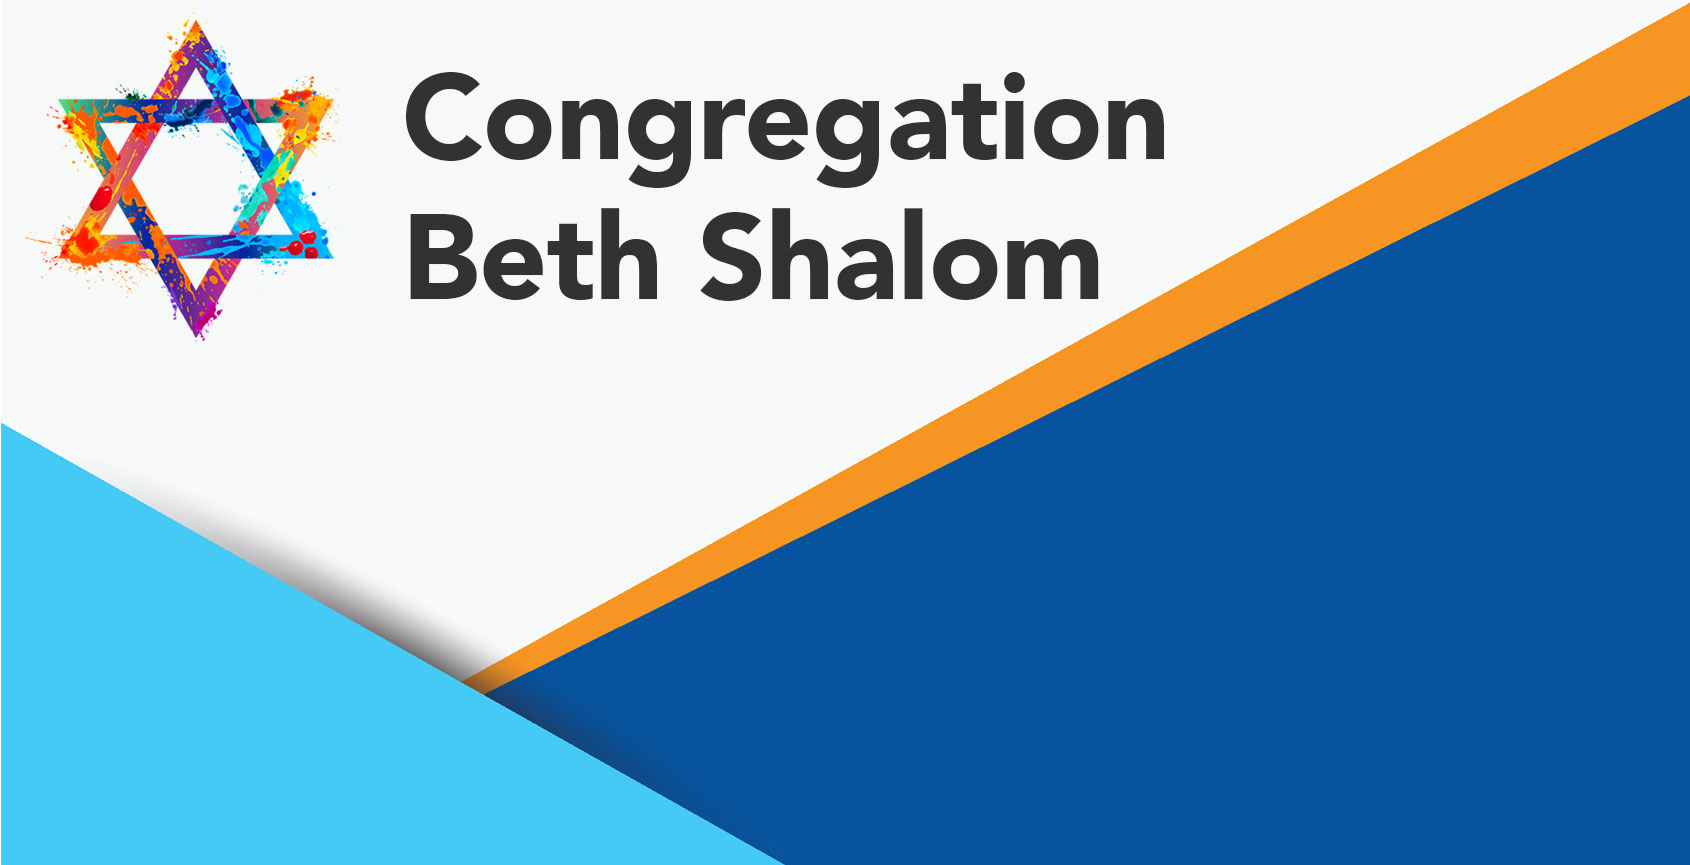 Welcome to Congregation Beth Shalom